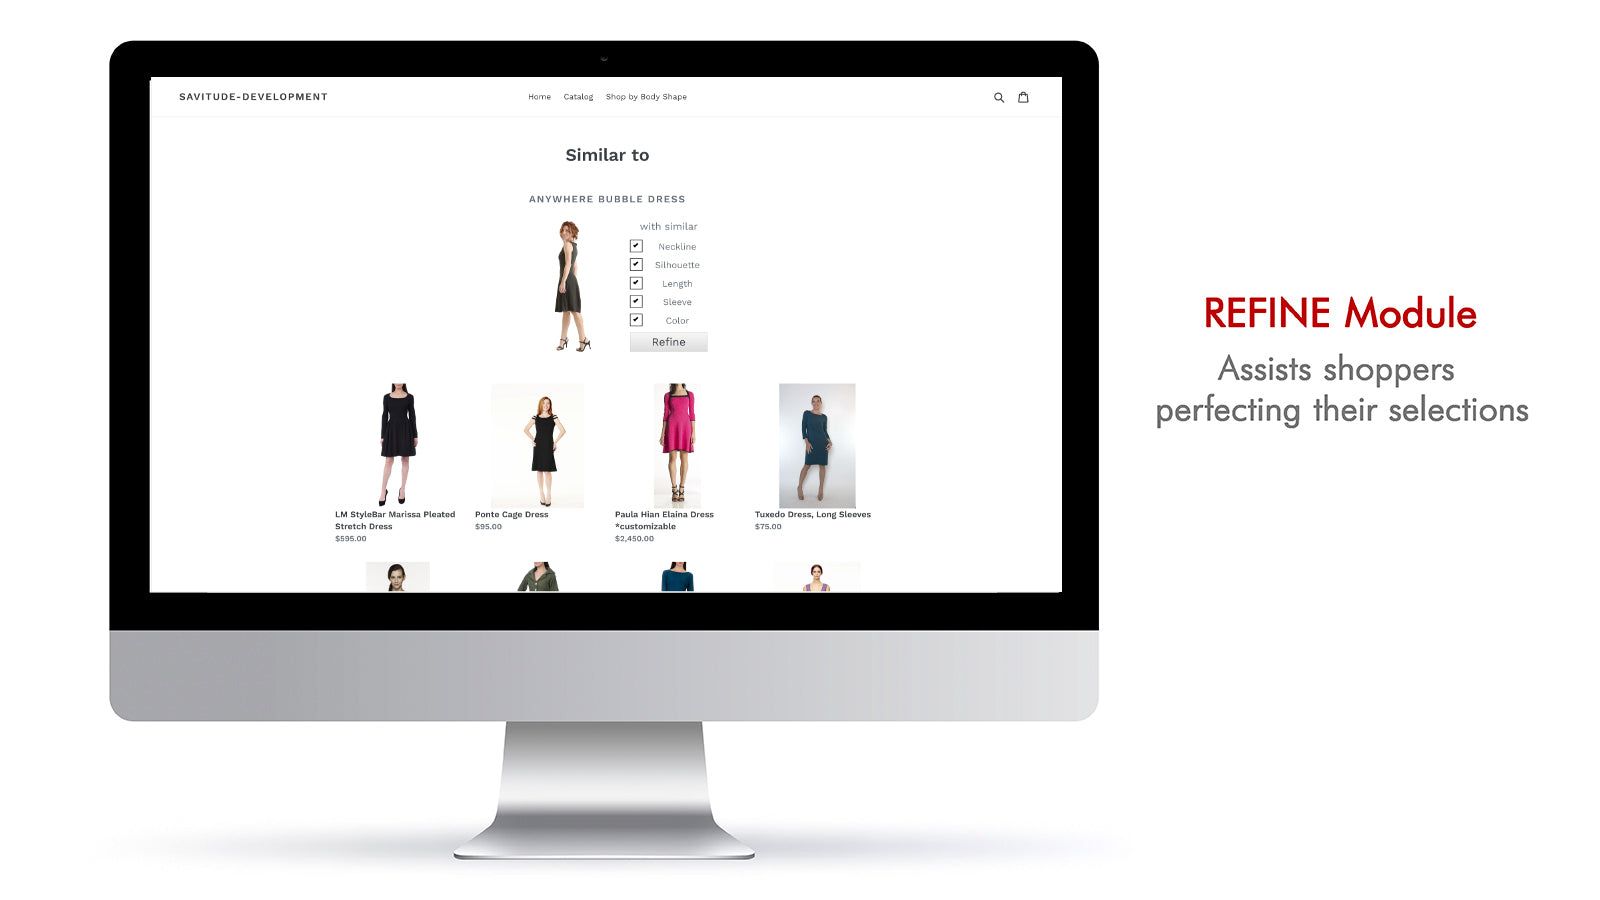 Savitude's REFINE module lets shoppers search by design feature